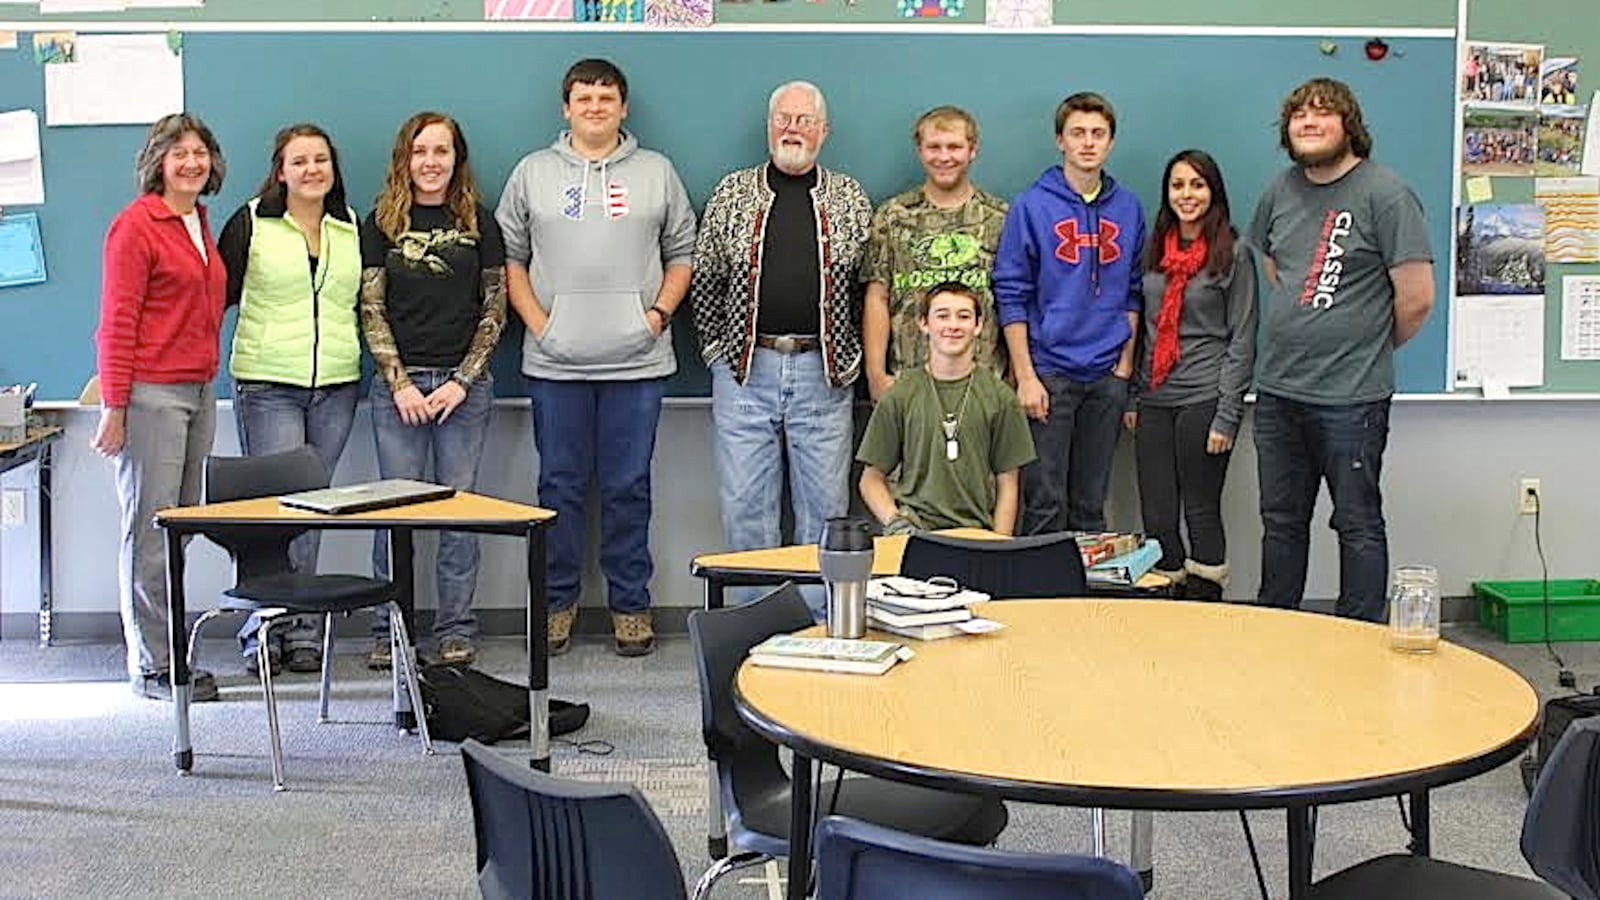 Teacher Denise Perritt (far left) poses with her high school English students and a guest speaker who visited her class, author Robert Fulghum.